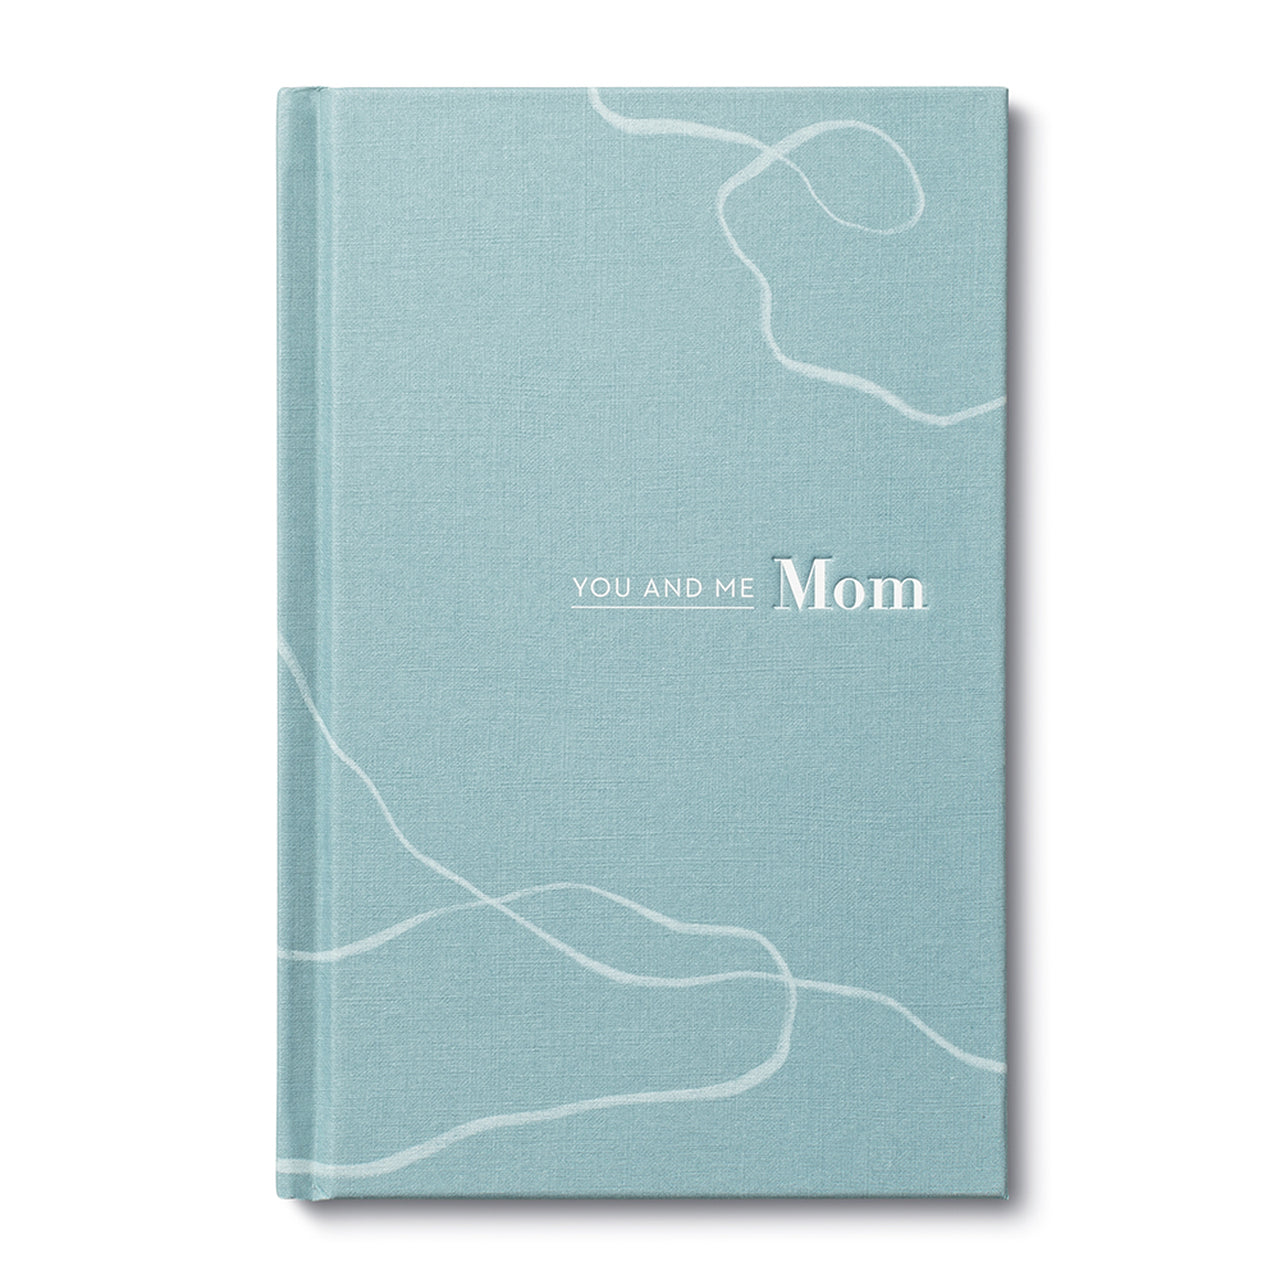 You and Me Mom Guided Journal